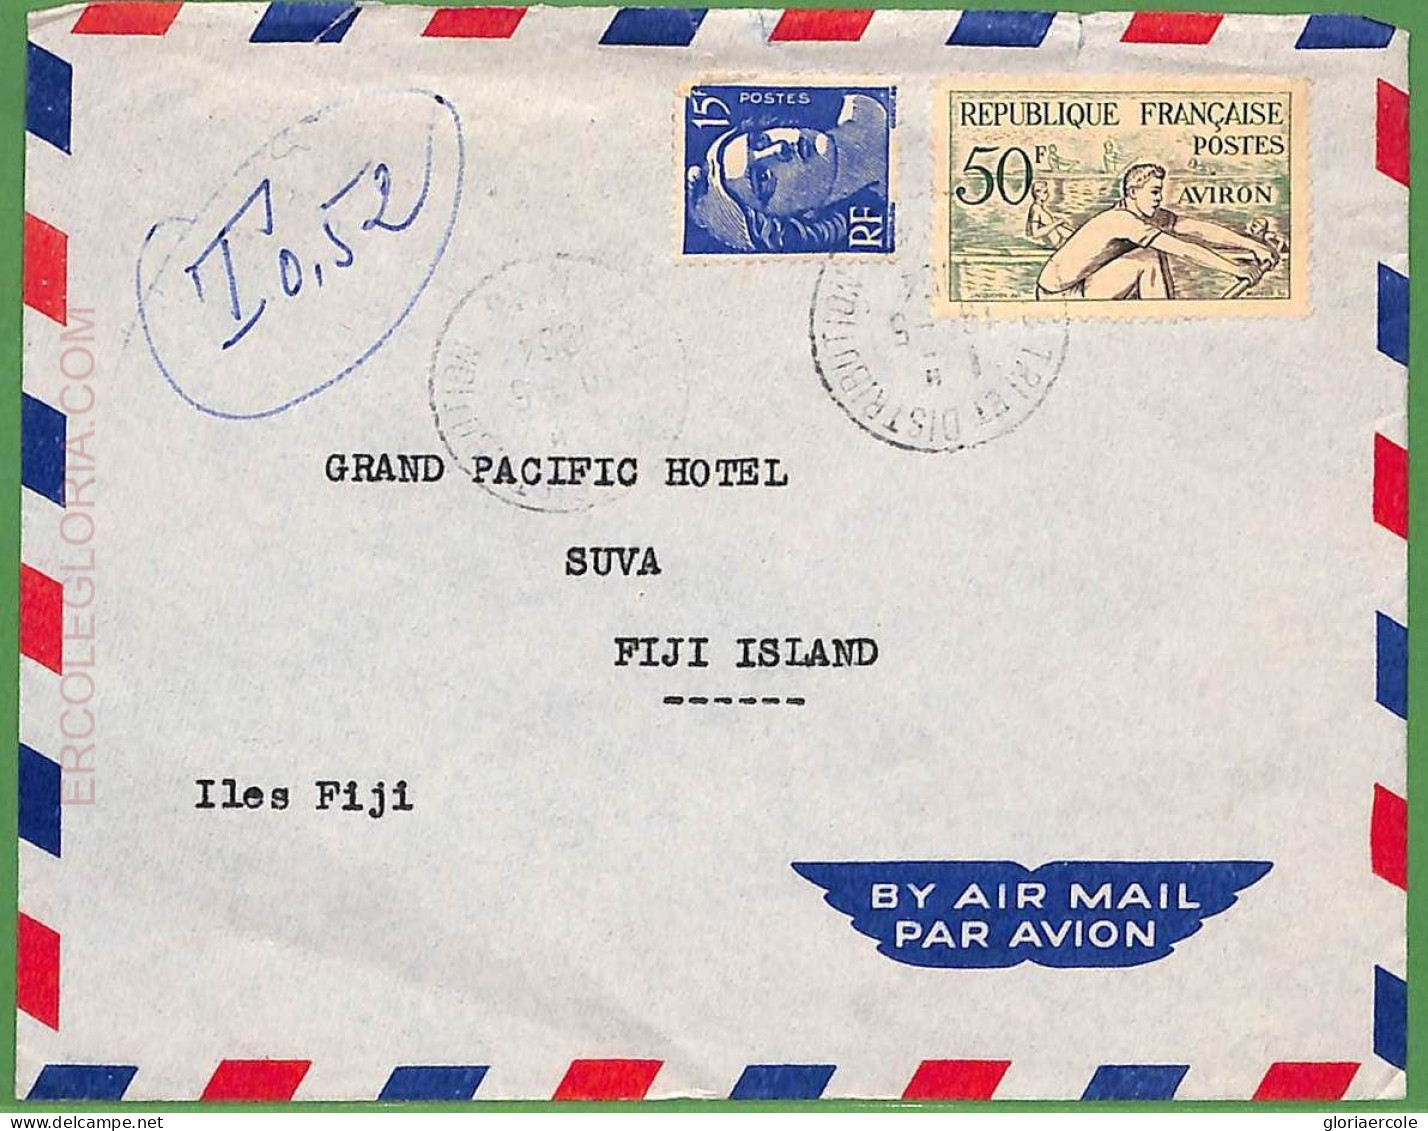 Af3734 - FRANCE - POSTAL HISTORY - AIRMAIL COVER To FIJI  - ROWING Canoes - 1954 - Canoe